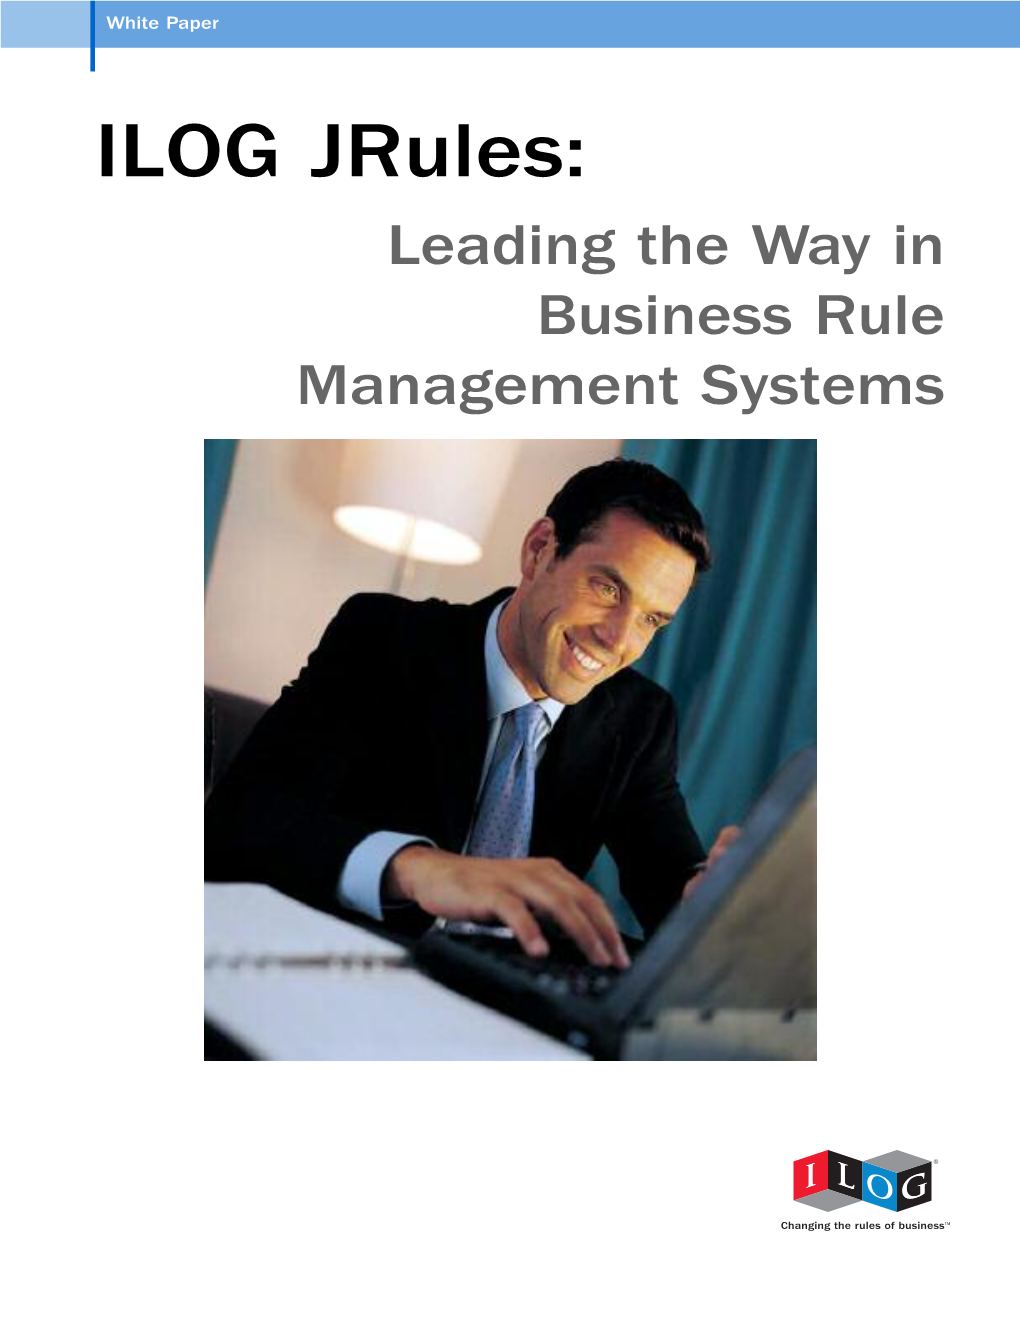 ILOG Jrules: Leading the Way in Business Rule Management Systems ILOG Jrules: Leading the Way in Business Rule Management Systems White Paper